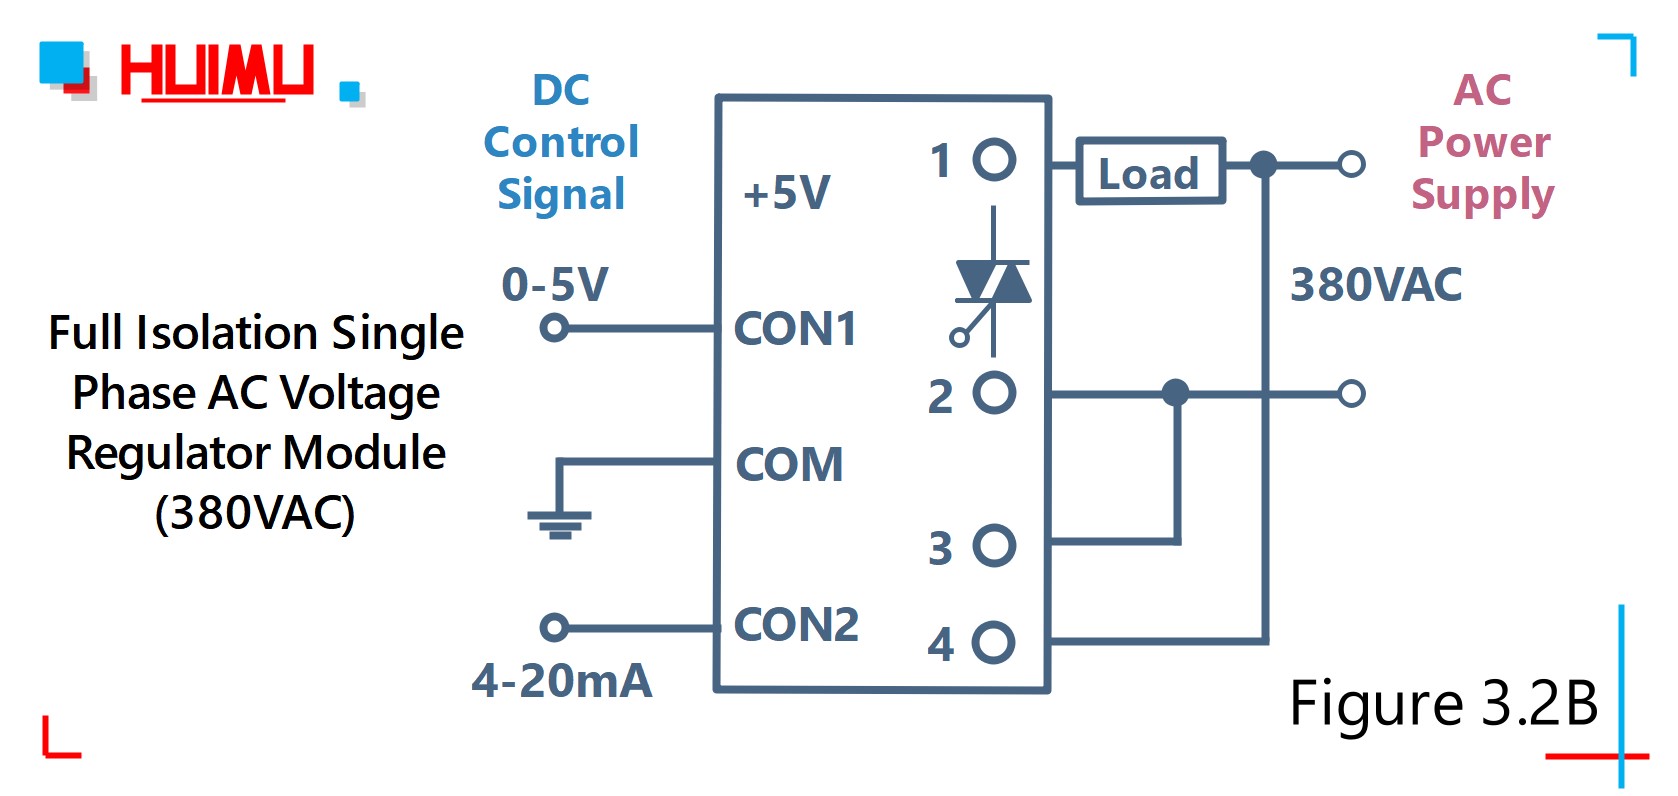 How to wire MGR mager MGR-DTY2240EG full isolation single phase AC voltage regulator? 380VAC type AC voltage regulator module circuit diagram, rated working voltage is 380VAC. More detail via www.@huimultd.com